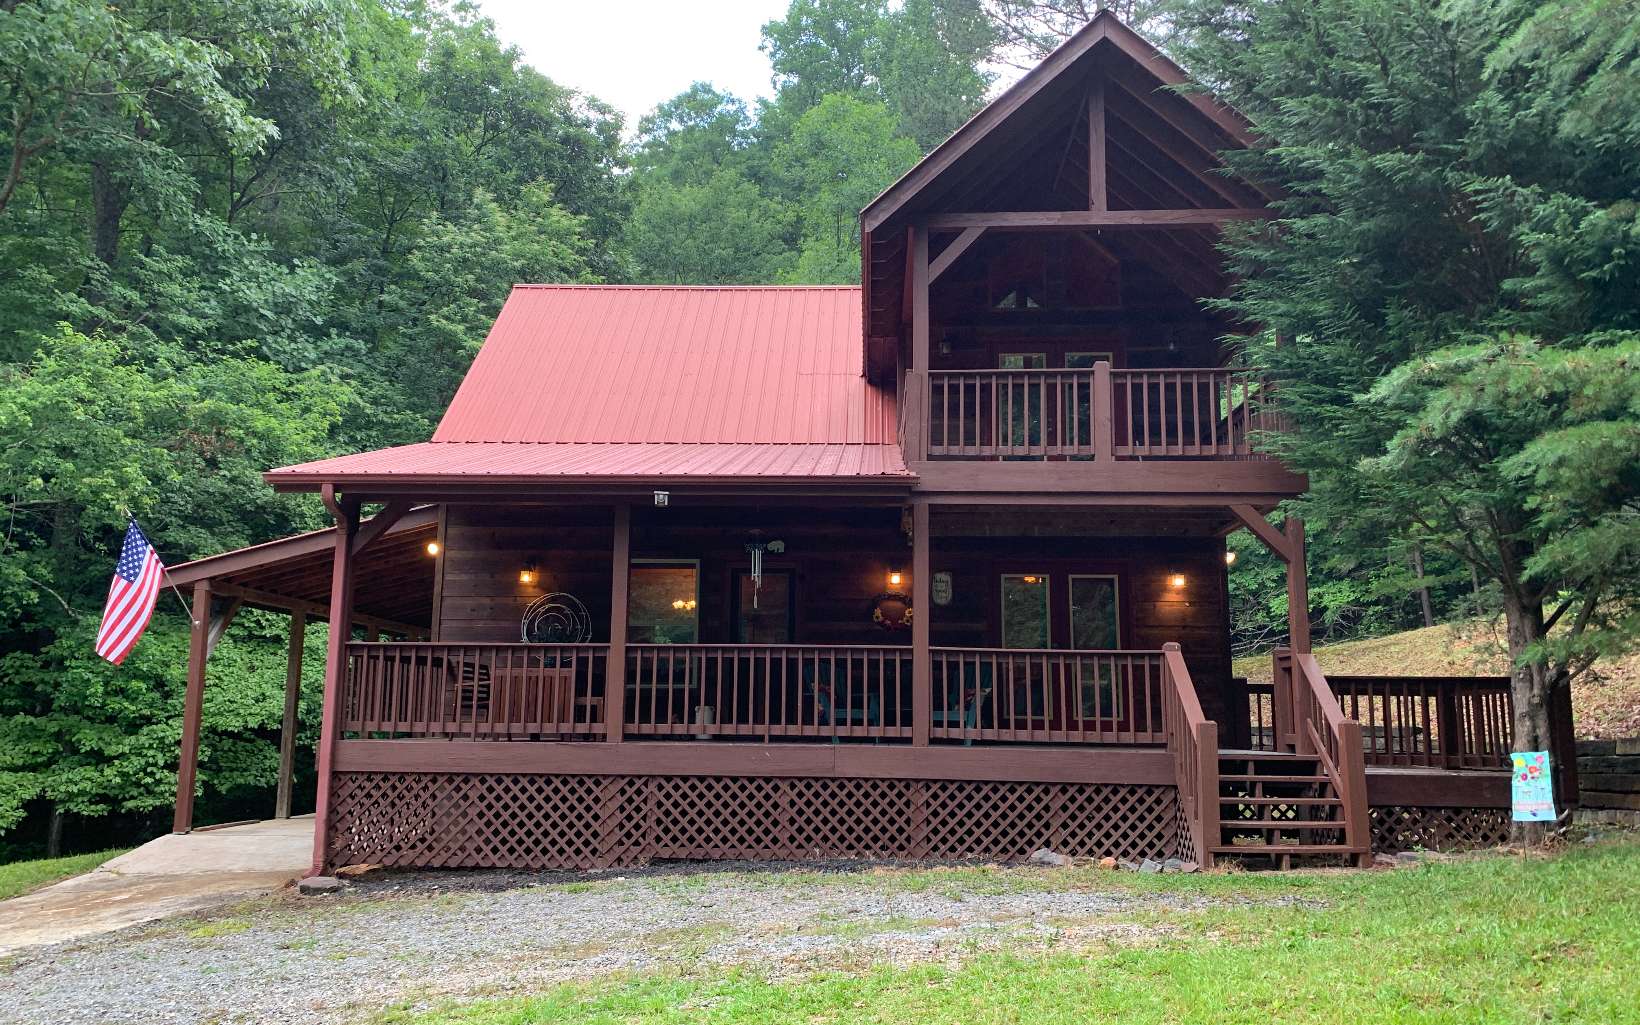 This Cabin Retreat located close to the Aska Adventure Area is being sold with two parcels totaling 2.982 acres. Parcel #1 includes 1.982 acres + gravel drive leading to existing cabin. Parcel #2 includes 1.00 acre lot w/ gravel driveway, private well and level area to build an additional rental cabin (check local building codes). Both parcels are divided by a flowing stream. Seller has plats, legal description, recorded driveway and well easement; available upon request. The 2 Bedroom / 2 Bath cabin has an open floor plan with knotty pine throughout, high ceilings, rock fireplace, nicely appointed kitchen, a laundry closet and 1 bed & 1 bath on main level with access to deck; the primary bedroom upstairs features a private bathroom with balcony, perfect to enjoy morning coffee. There is a large, covered deck with space and power for a hot tub; a single car carport plus the gravel drive allows for plenty of parking. This cabin has wonderful indoor and outdoor spaces for relaxing and entertaining; kickback by the fire-pit while listening to the babbling brook. Best of all, the property is conveniently located in the Aska Adventure area of North Georgia; between Ellijay and Blue Ridge, and a short drive to great hiking and biking trails, Toccoa River & Lake Blue Ridge. This cabin is move-in ready as primary residence or great for Short Term Rental year-round.